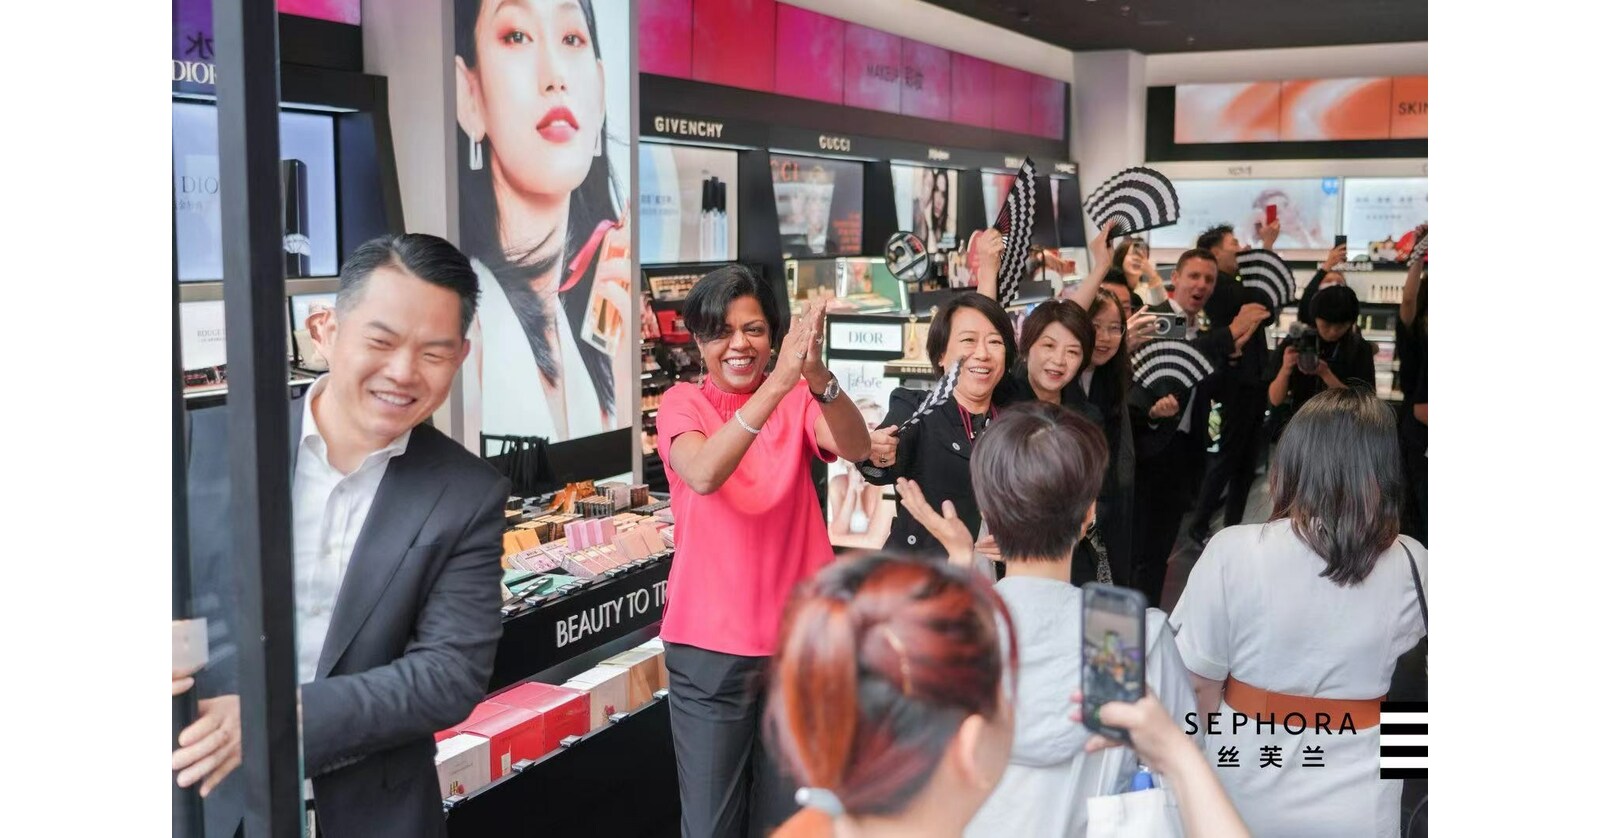 First Look: Beauty giant Sephora launches new store concept